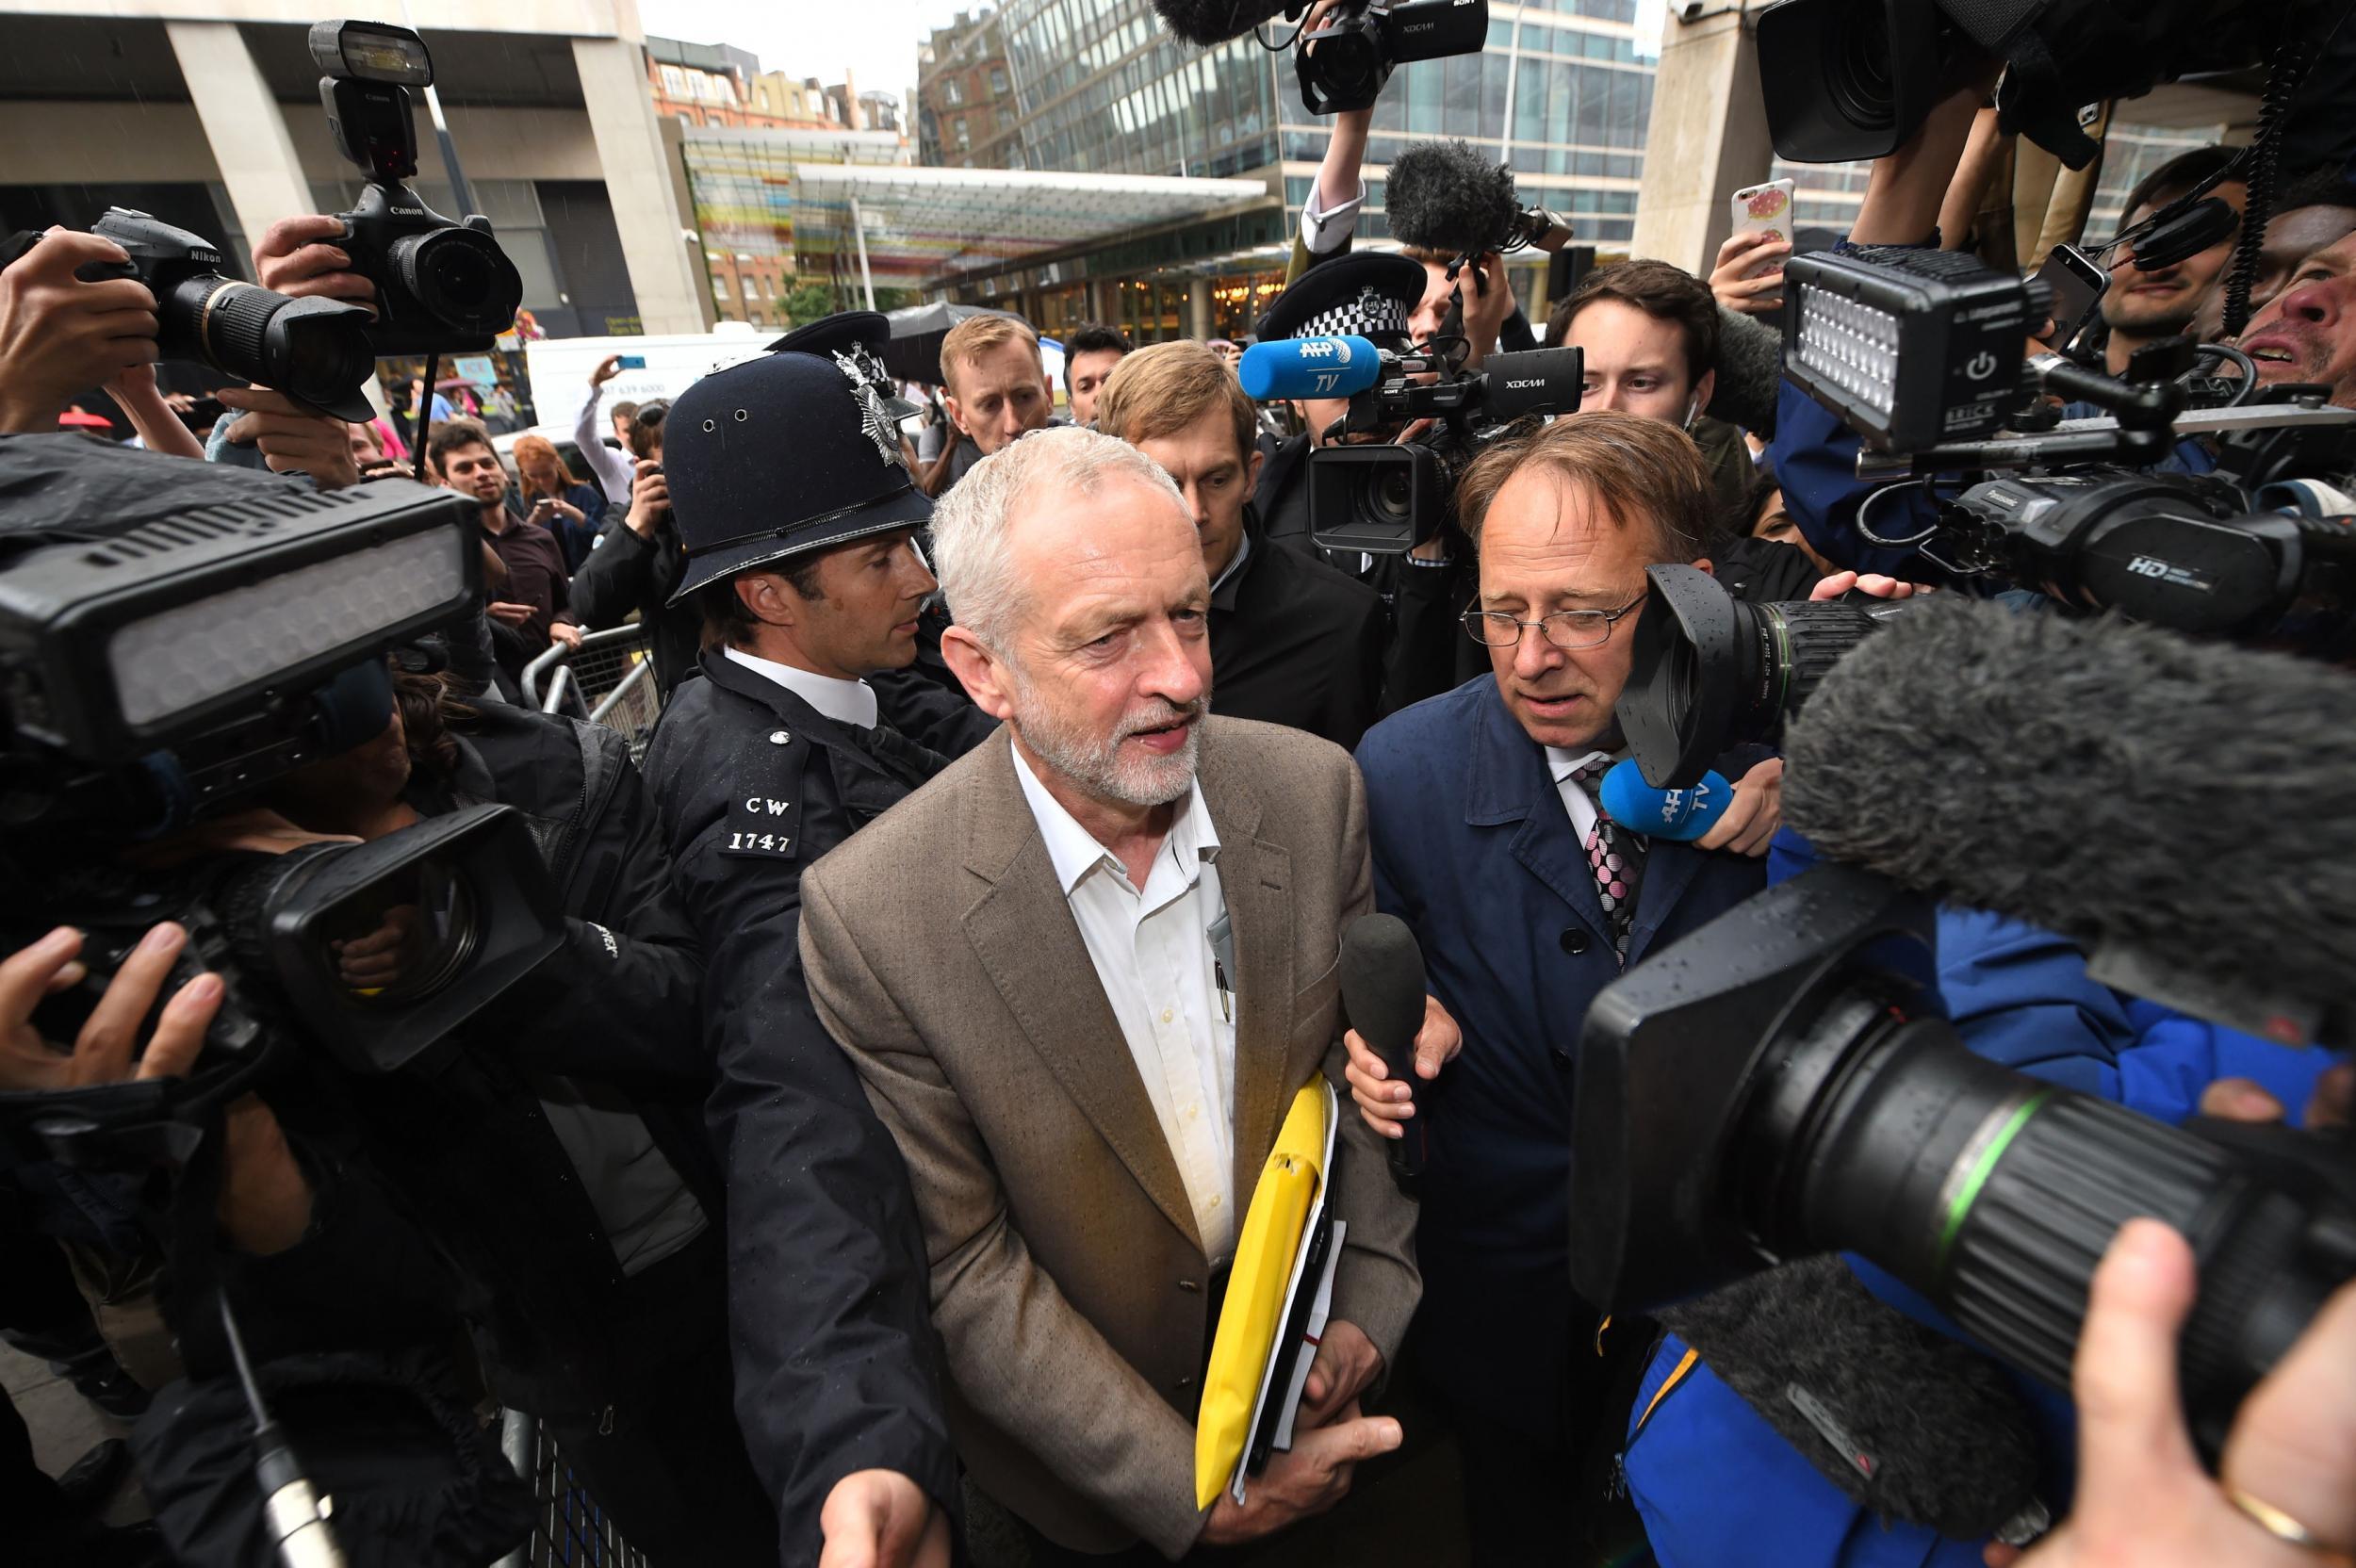 Labour Party leader Jeremy Corbyn arrives at Labour HQ in Westminster, London, where the Labour NEC are meeting about the party leadership contest.